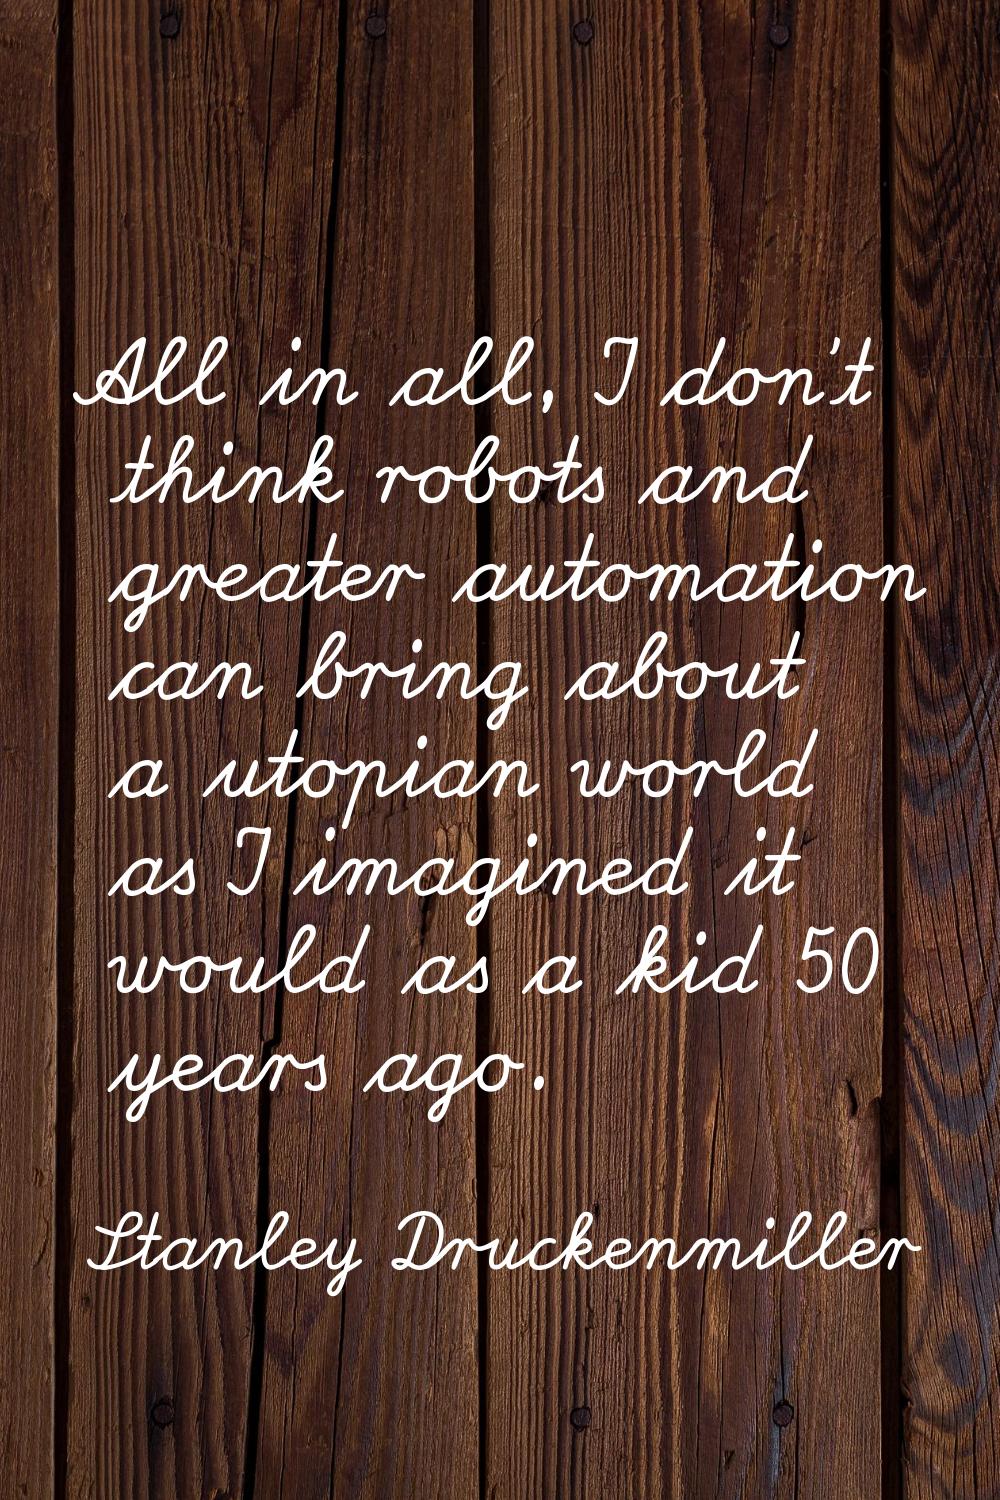 All in all, I don't think robots and greater automation can bring about a utopian world as I imagin